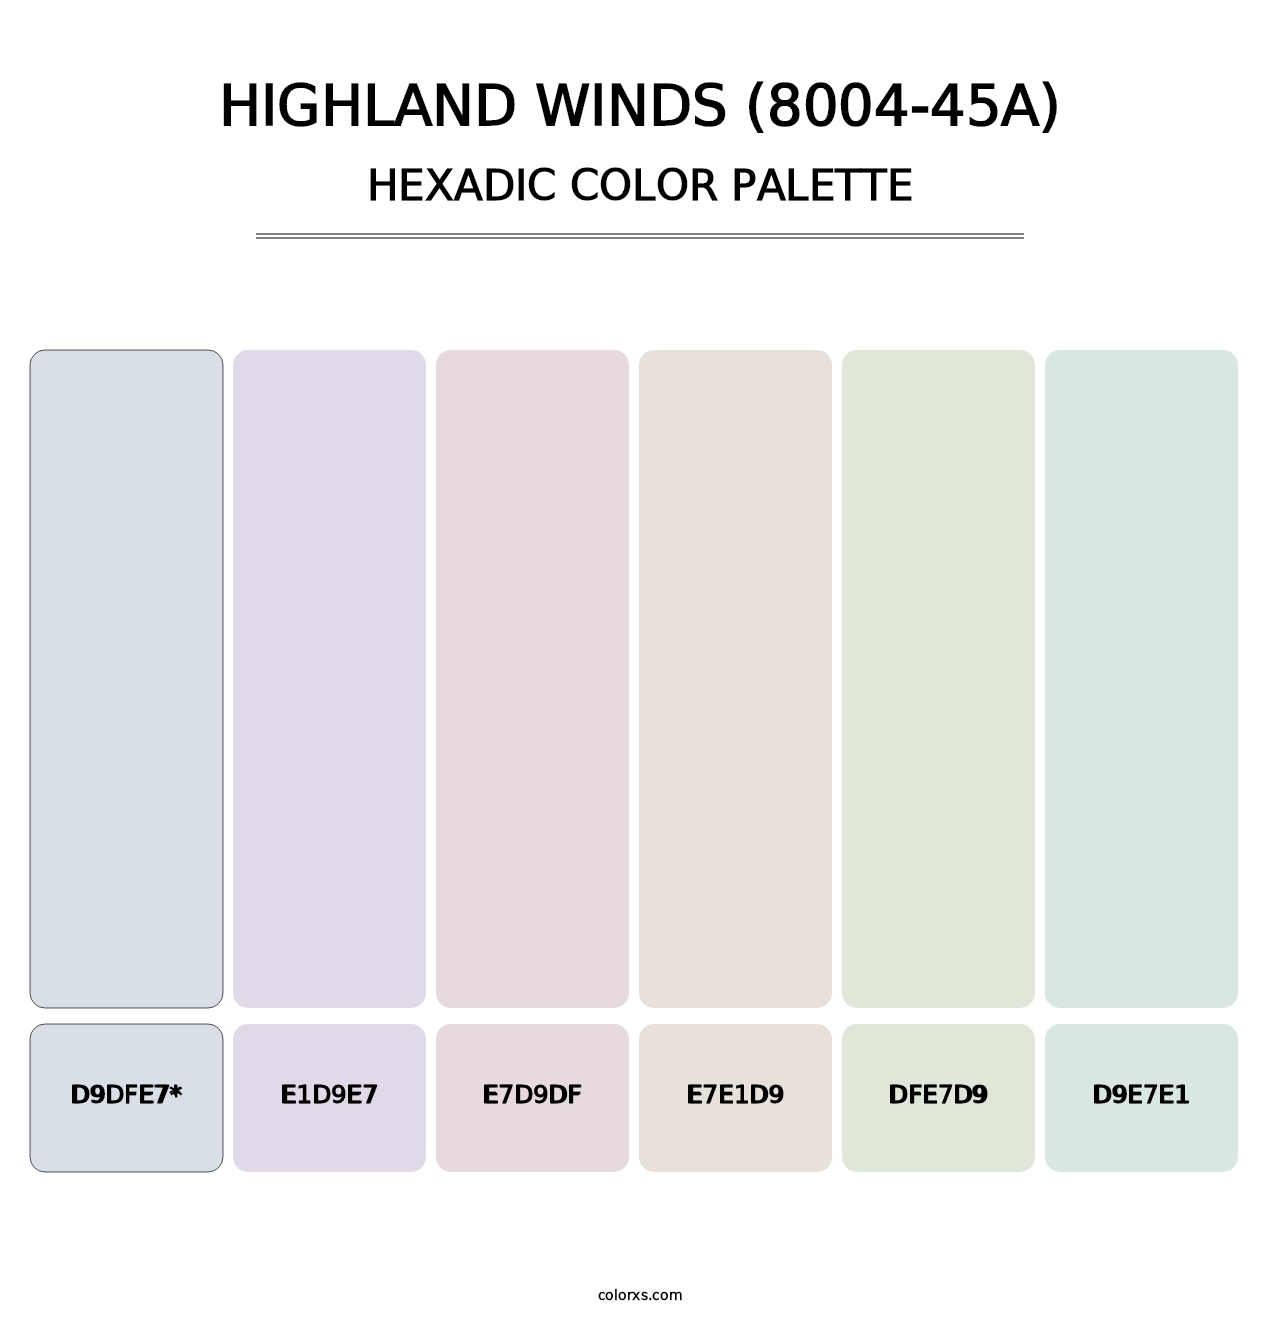 Highland Winds (8004-45A) - Hexadic Color Palette